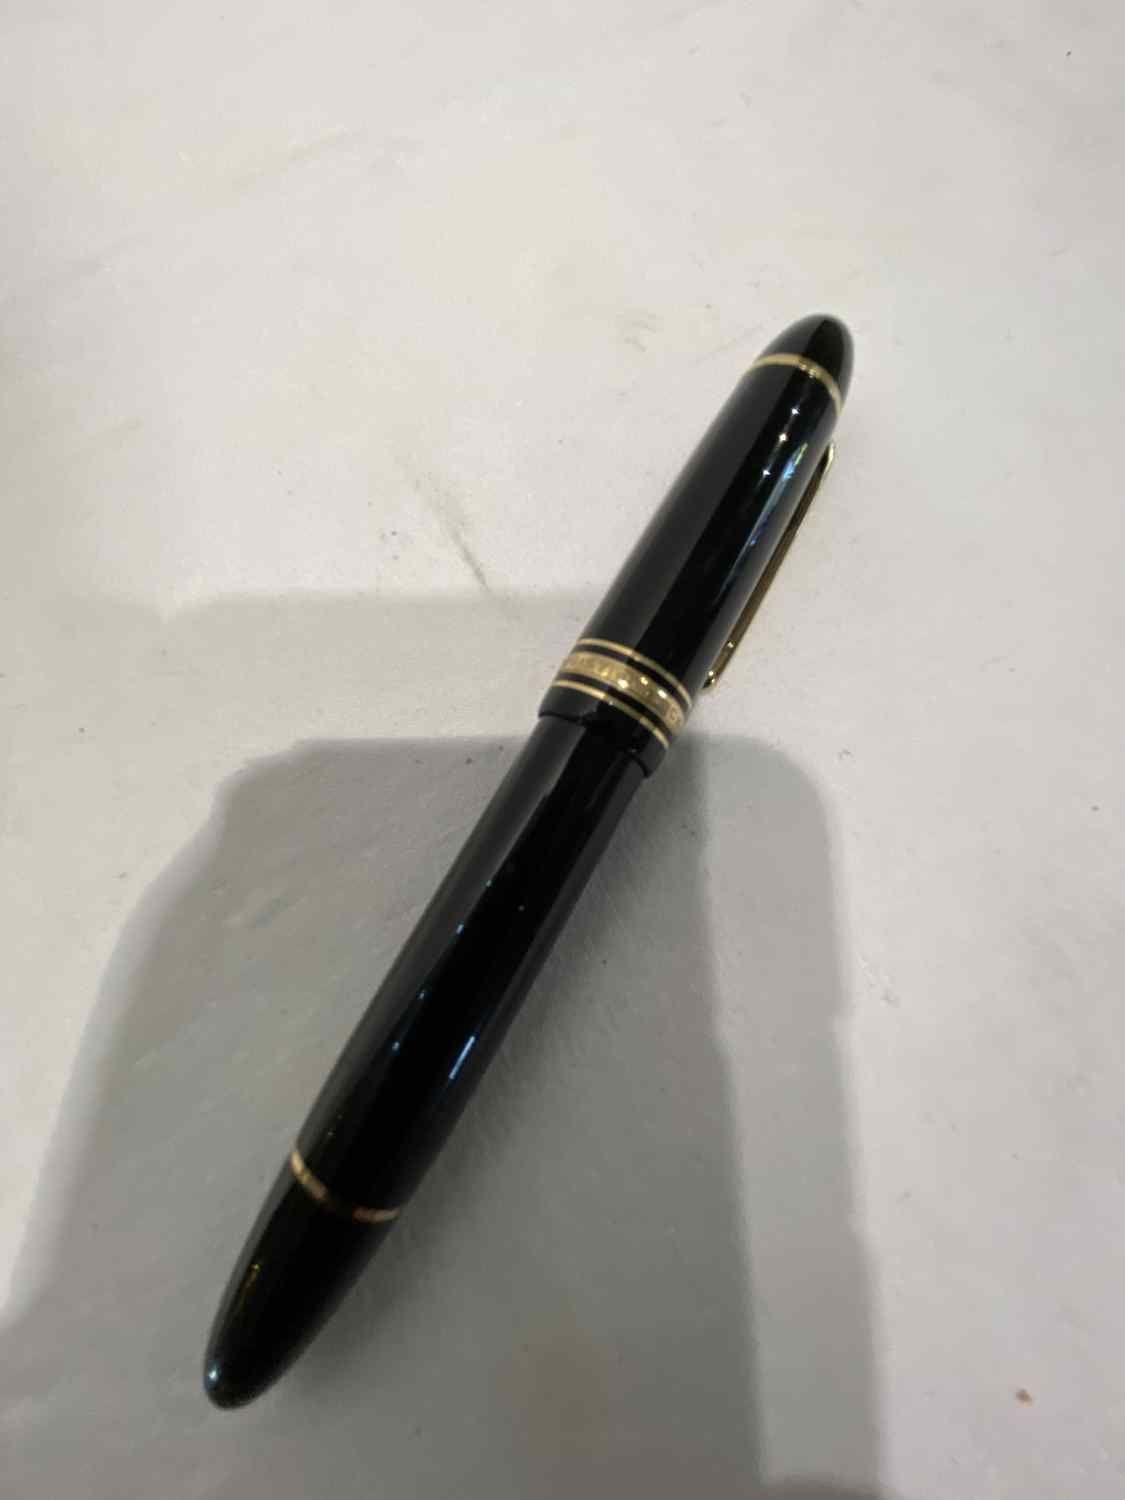 Null 1 Mont Blanc fountain pen with gold nib